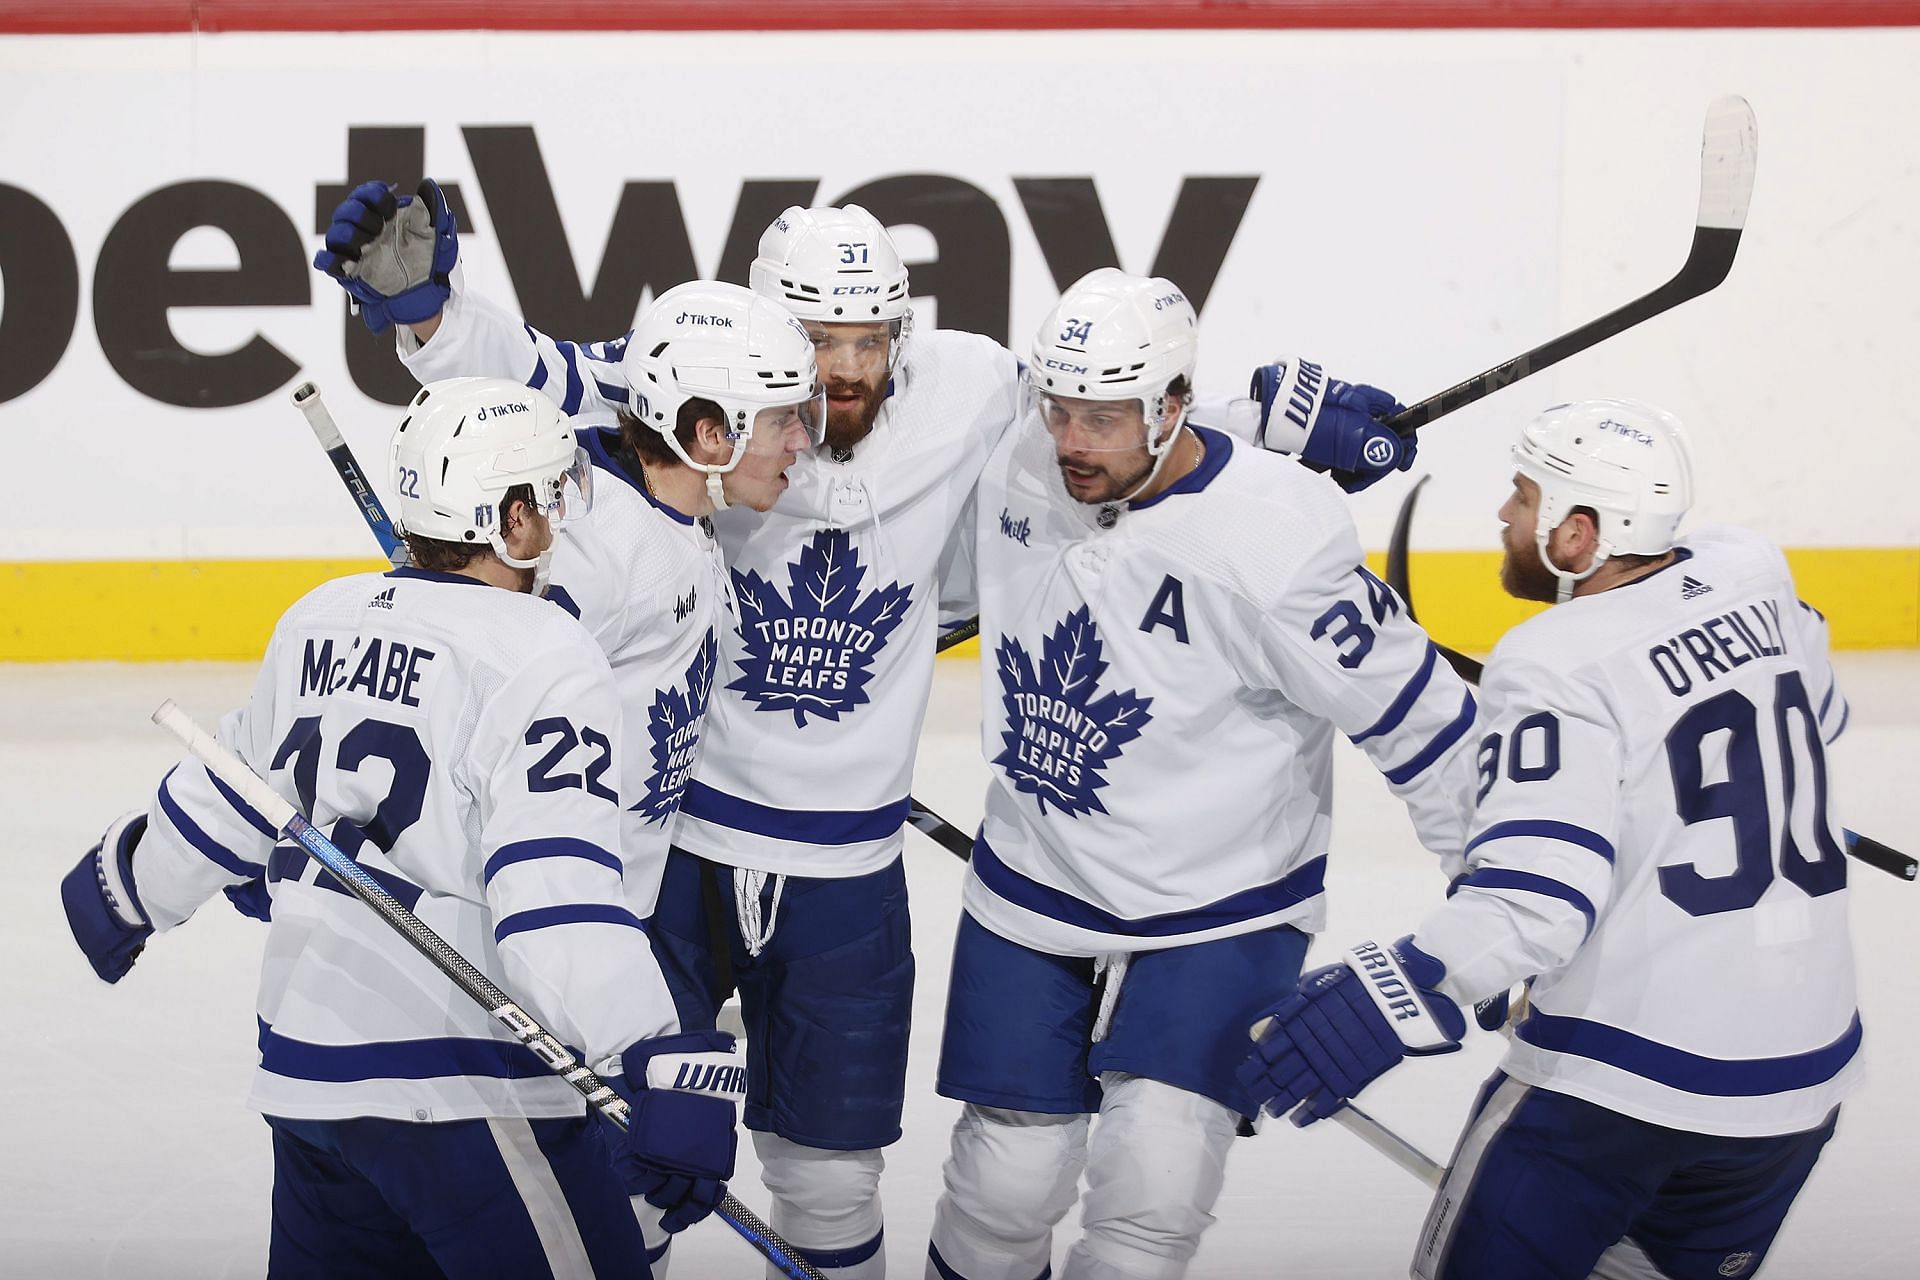 Toronto Maple Leafs fans breathe a sigh of relief after avoiding sweep against Florida Panthers